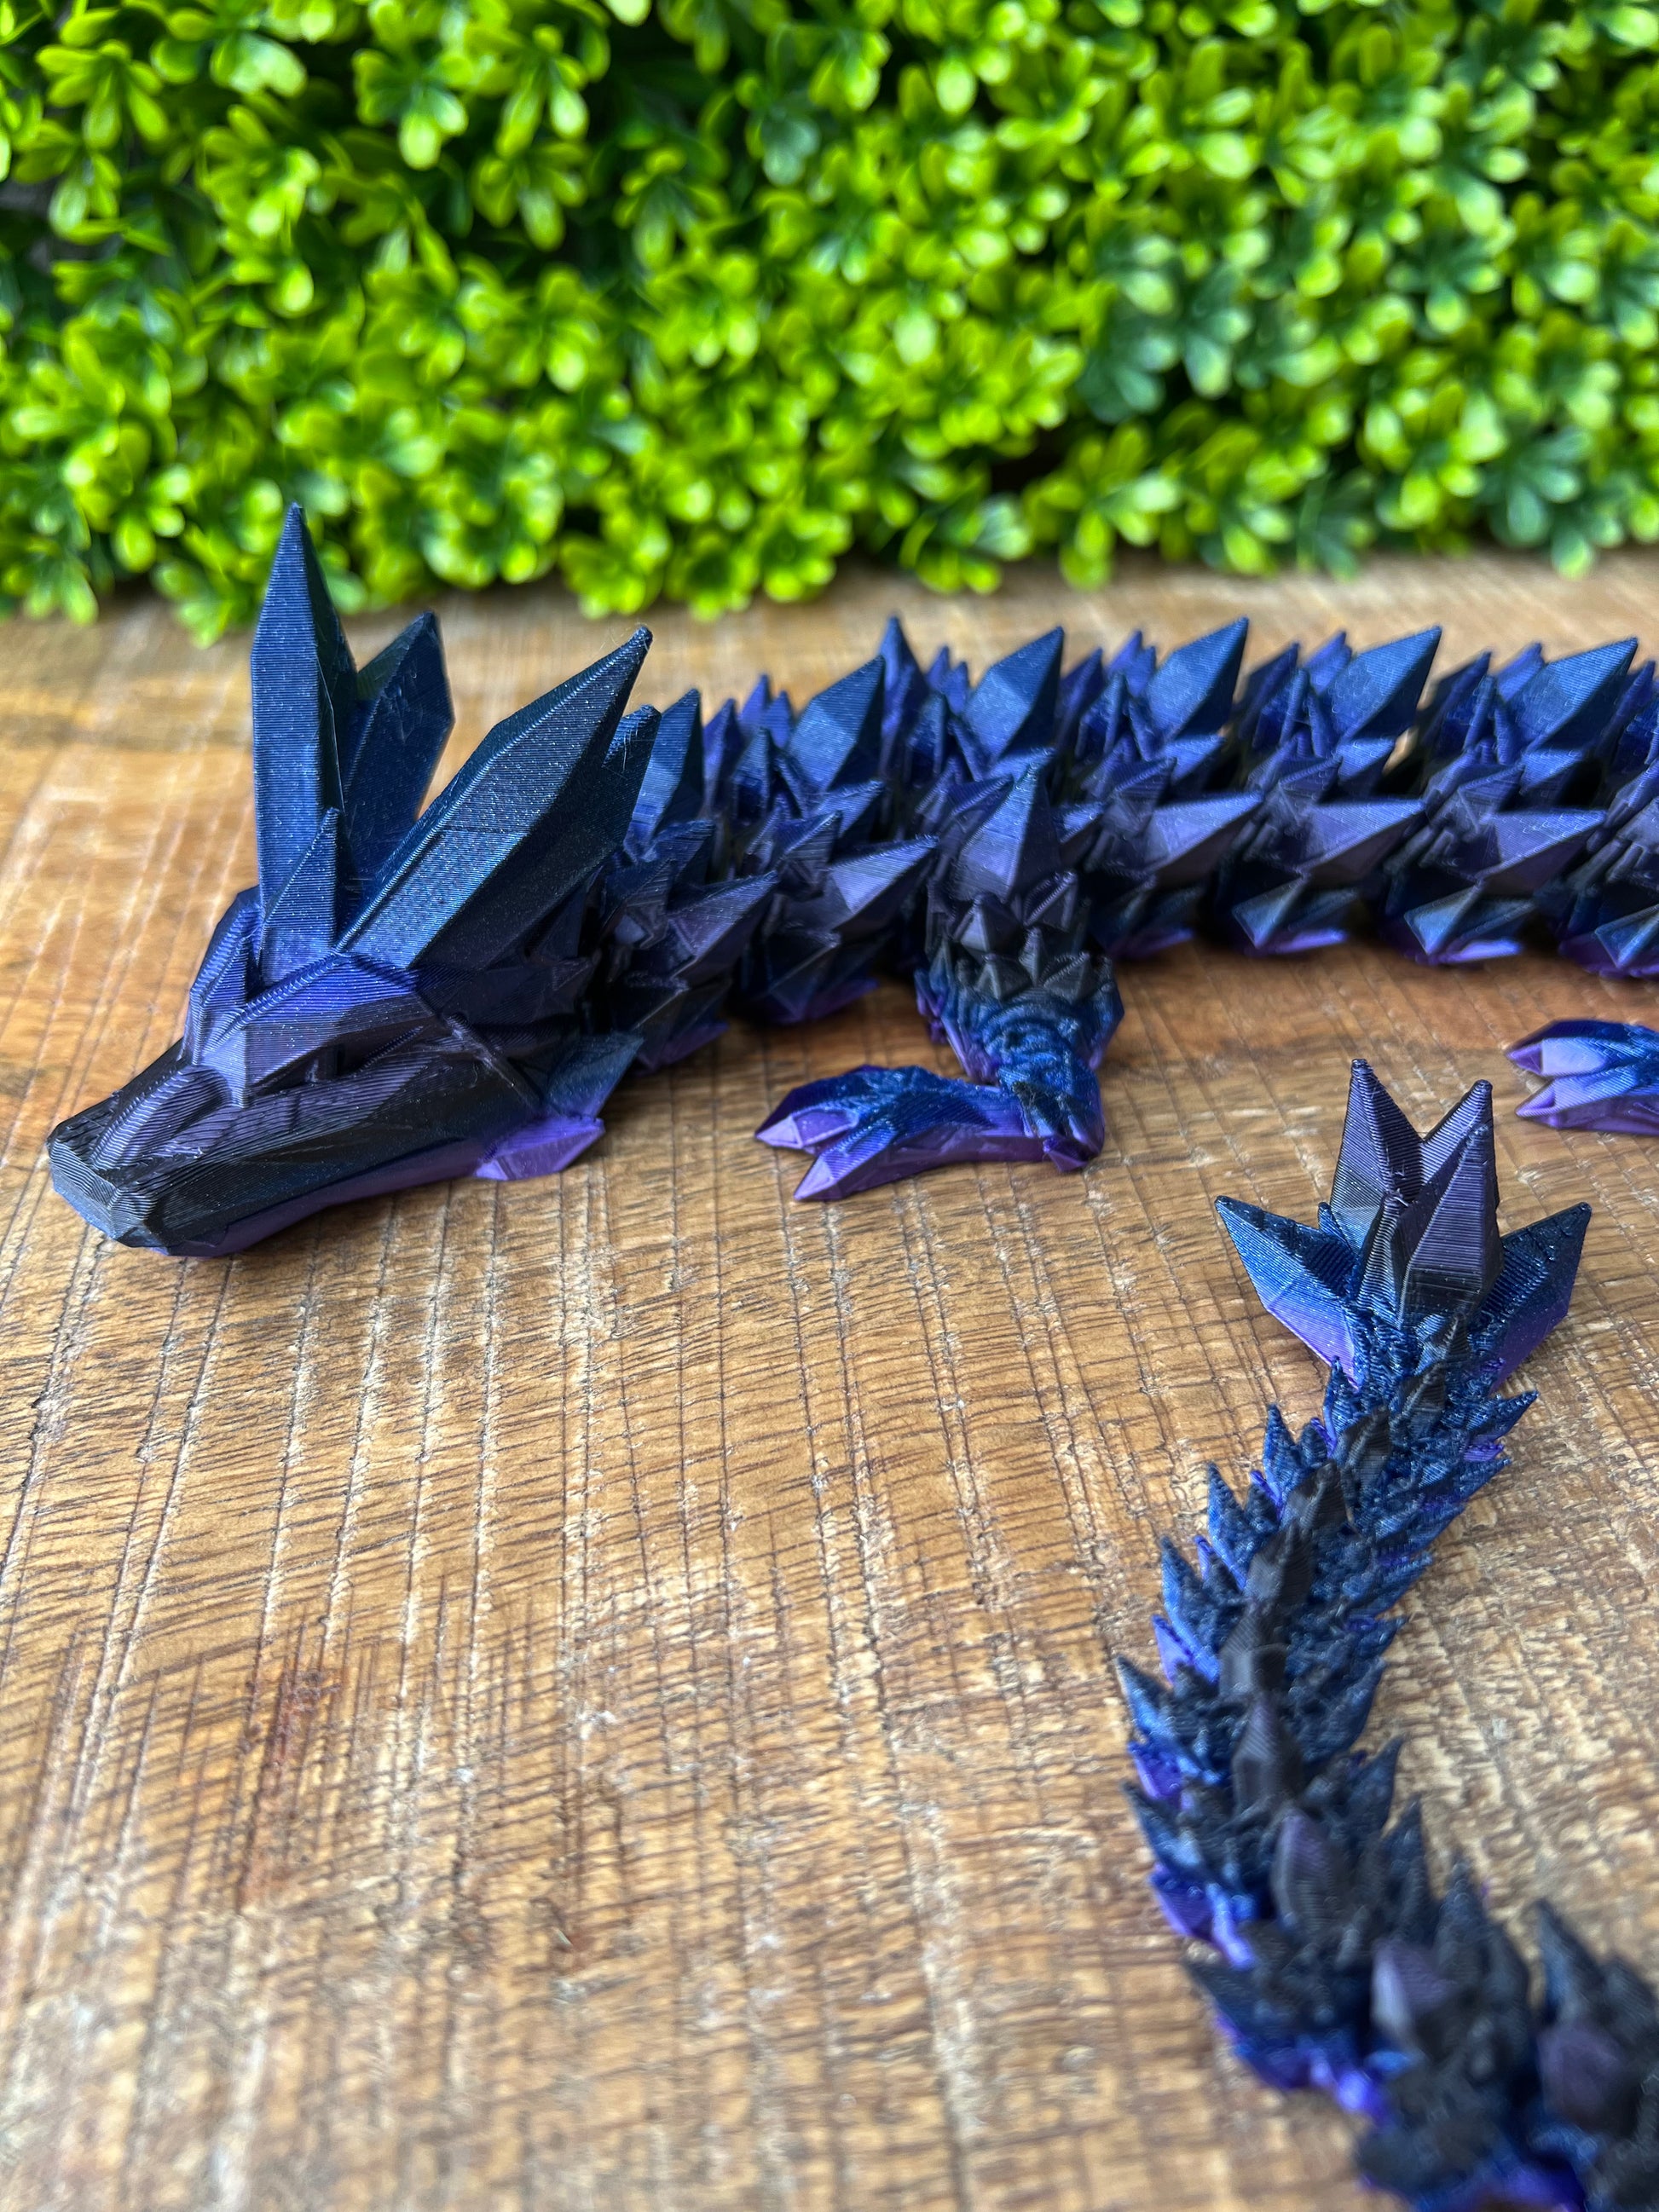 3d Printed Articulated Crystal Dragon Toy (24, Gold/Silver)